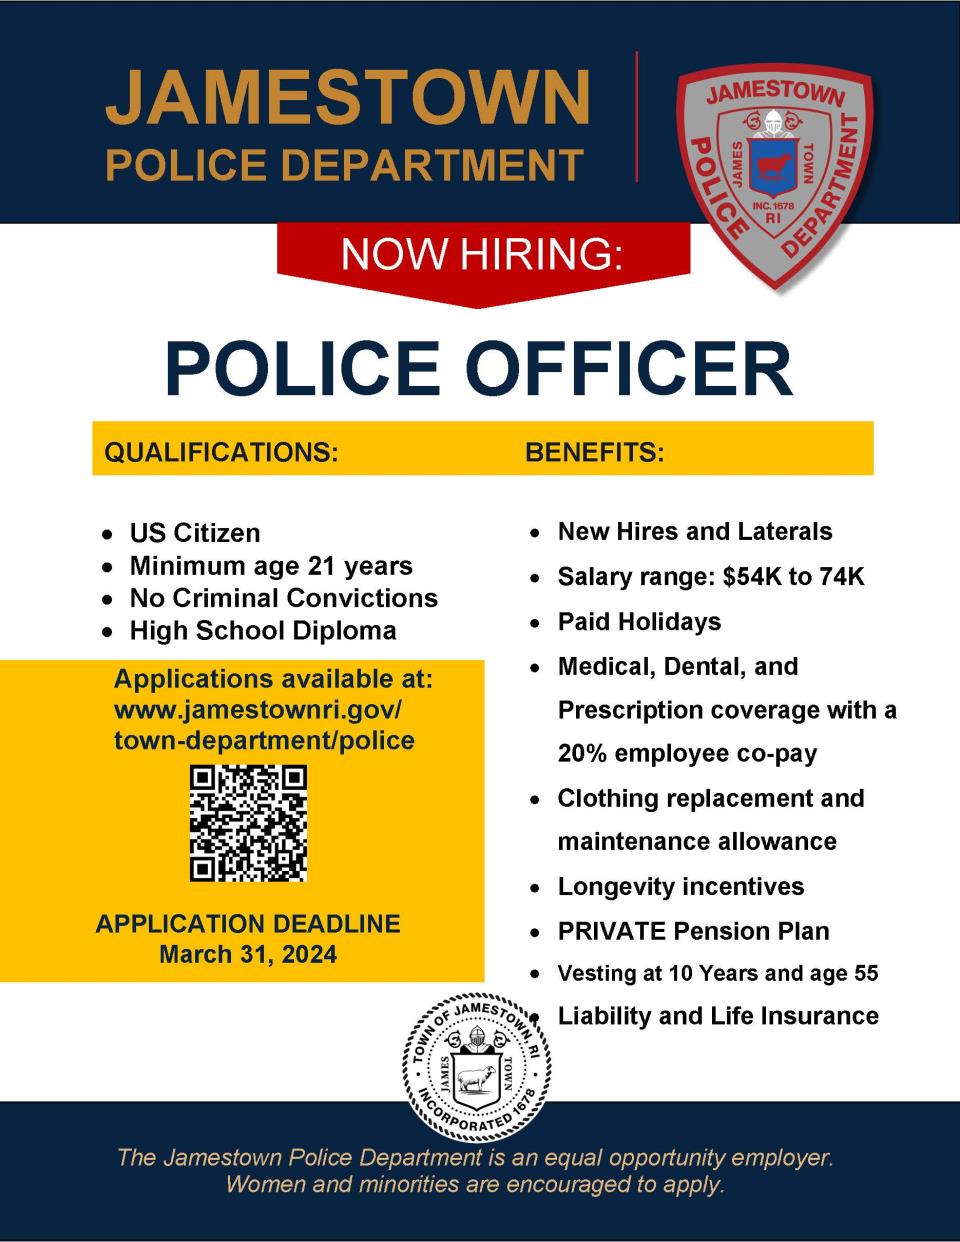 Hiring Police Officers